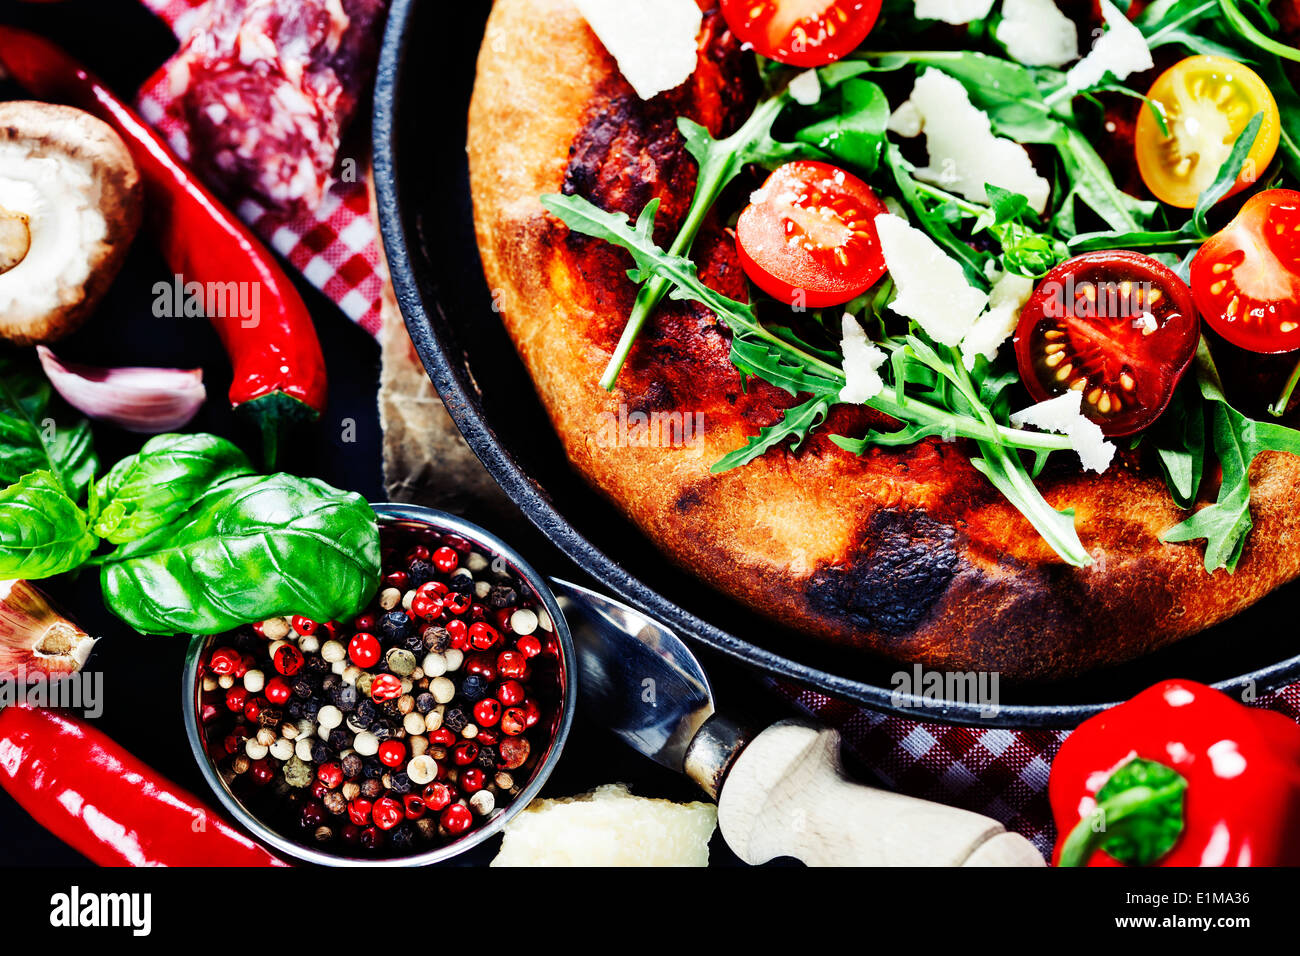 pizza and fresh italian ingredients on a dark background Stock Photo